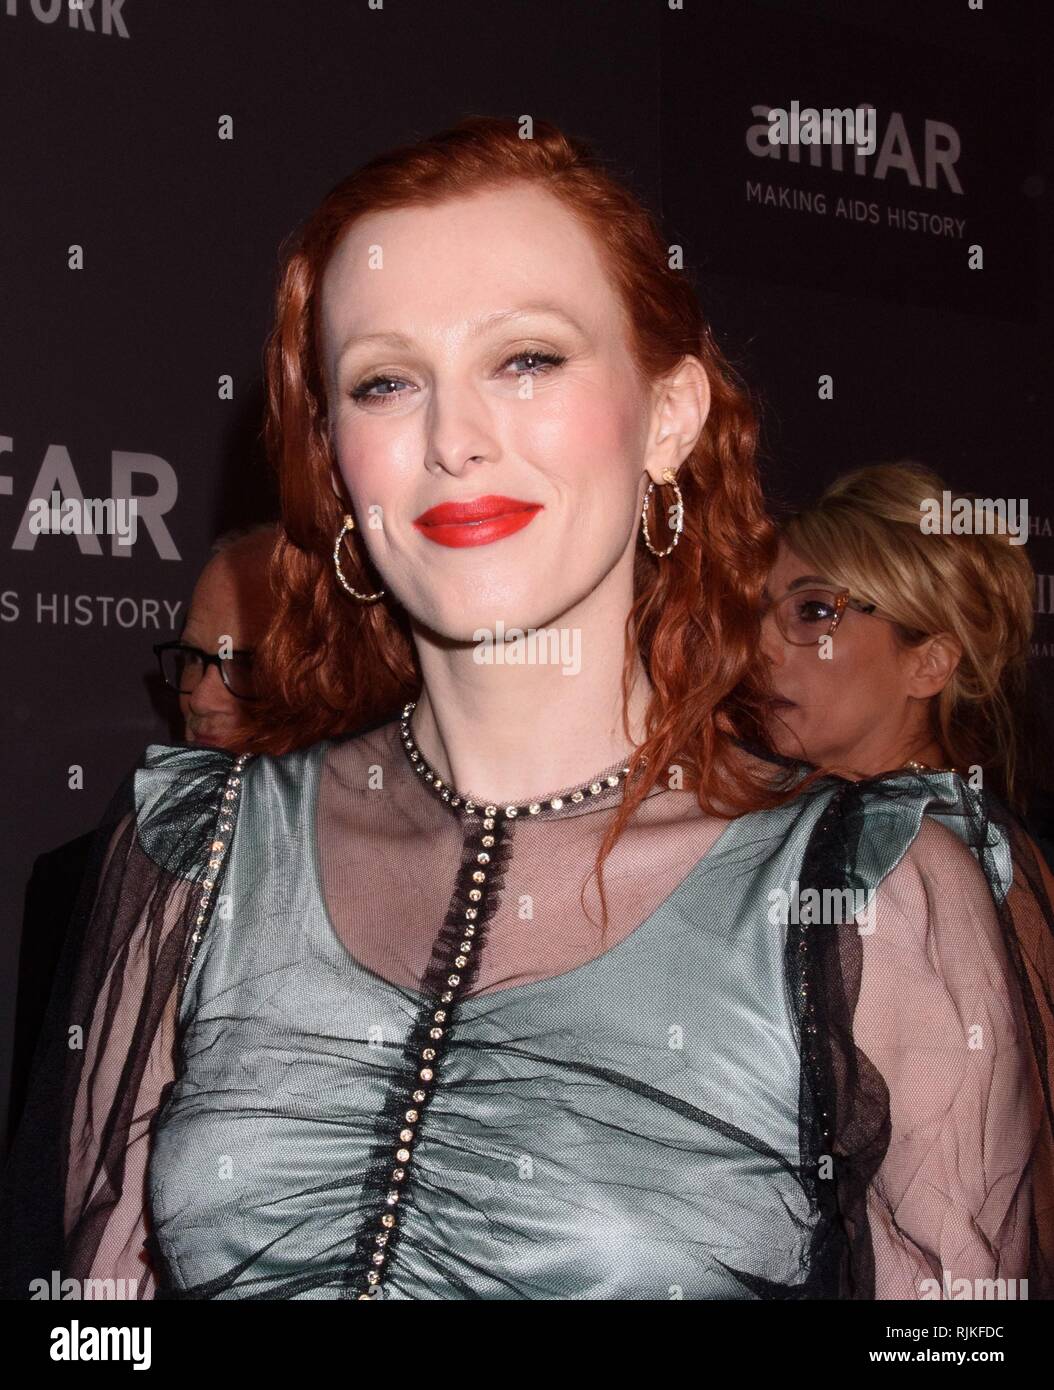 New York, NY, USA. 6th Feb, 2019. Karen Elson at arrivals for amfAR New York Gala, Cipriani Wall Street, New York, NY February 6, 2019. Credit: RCF/Everett Collection/Alamy Live News Stock Photo